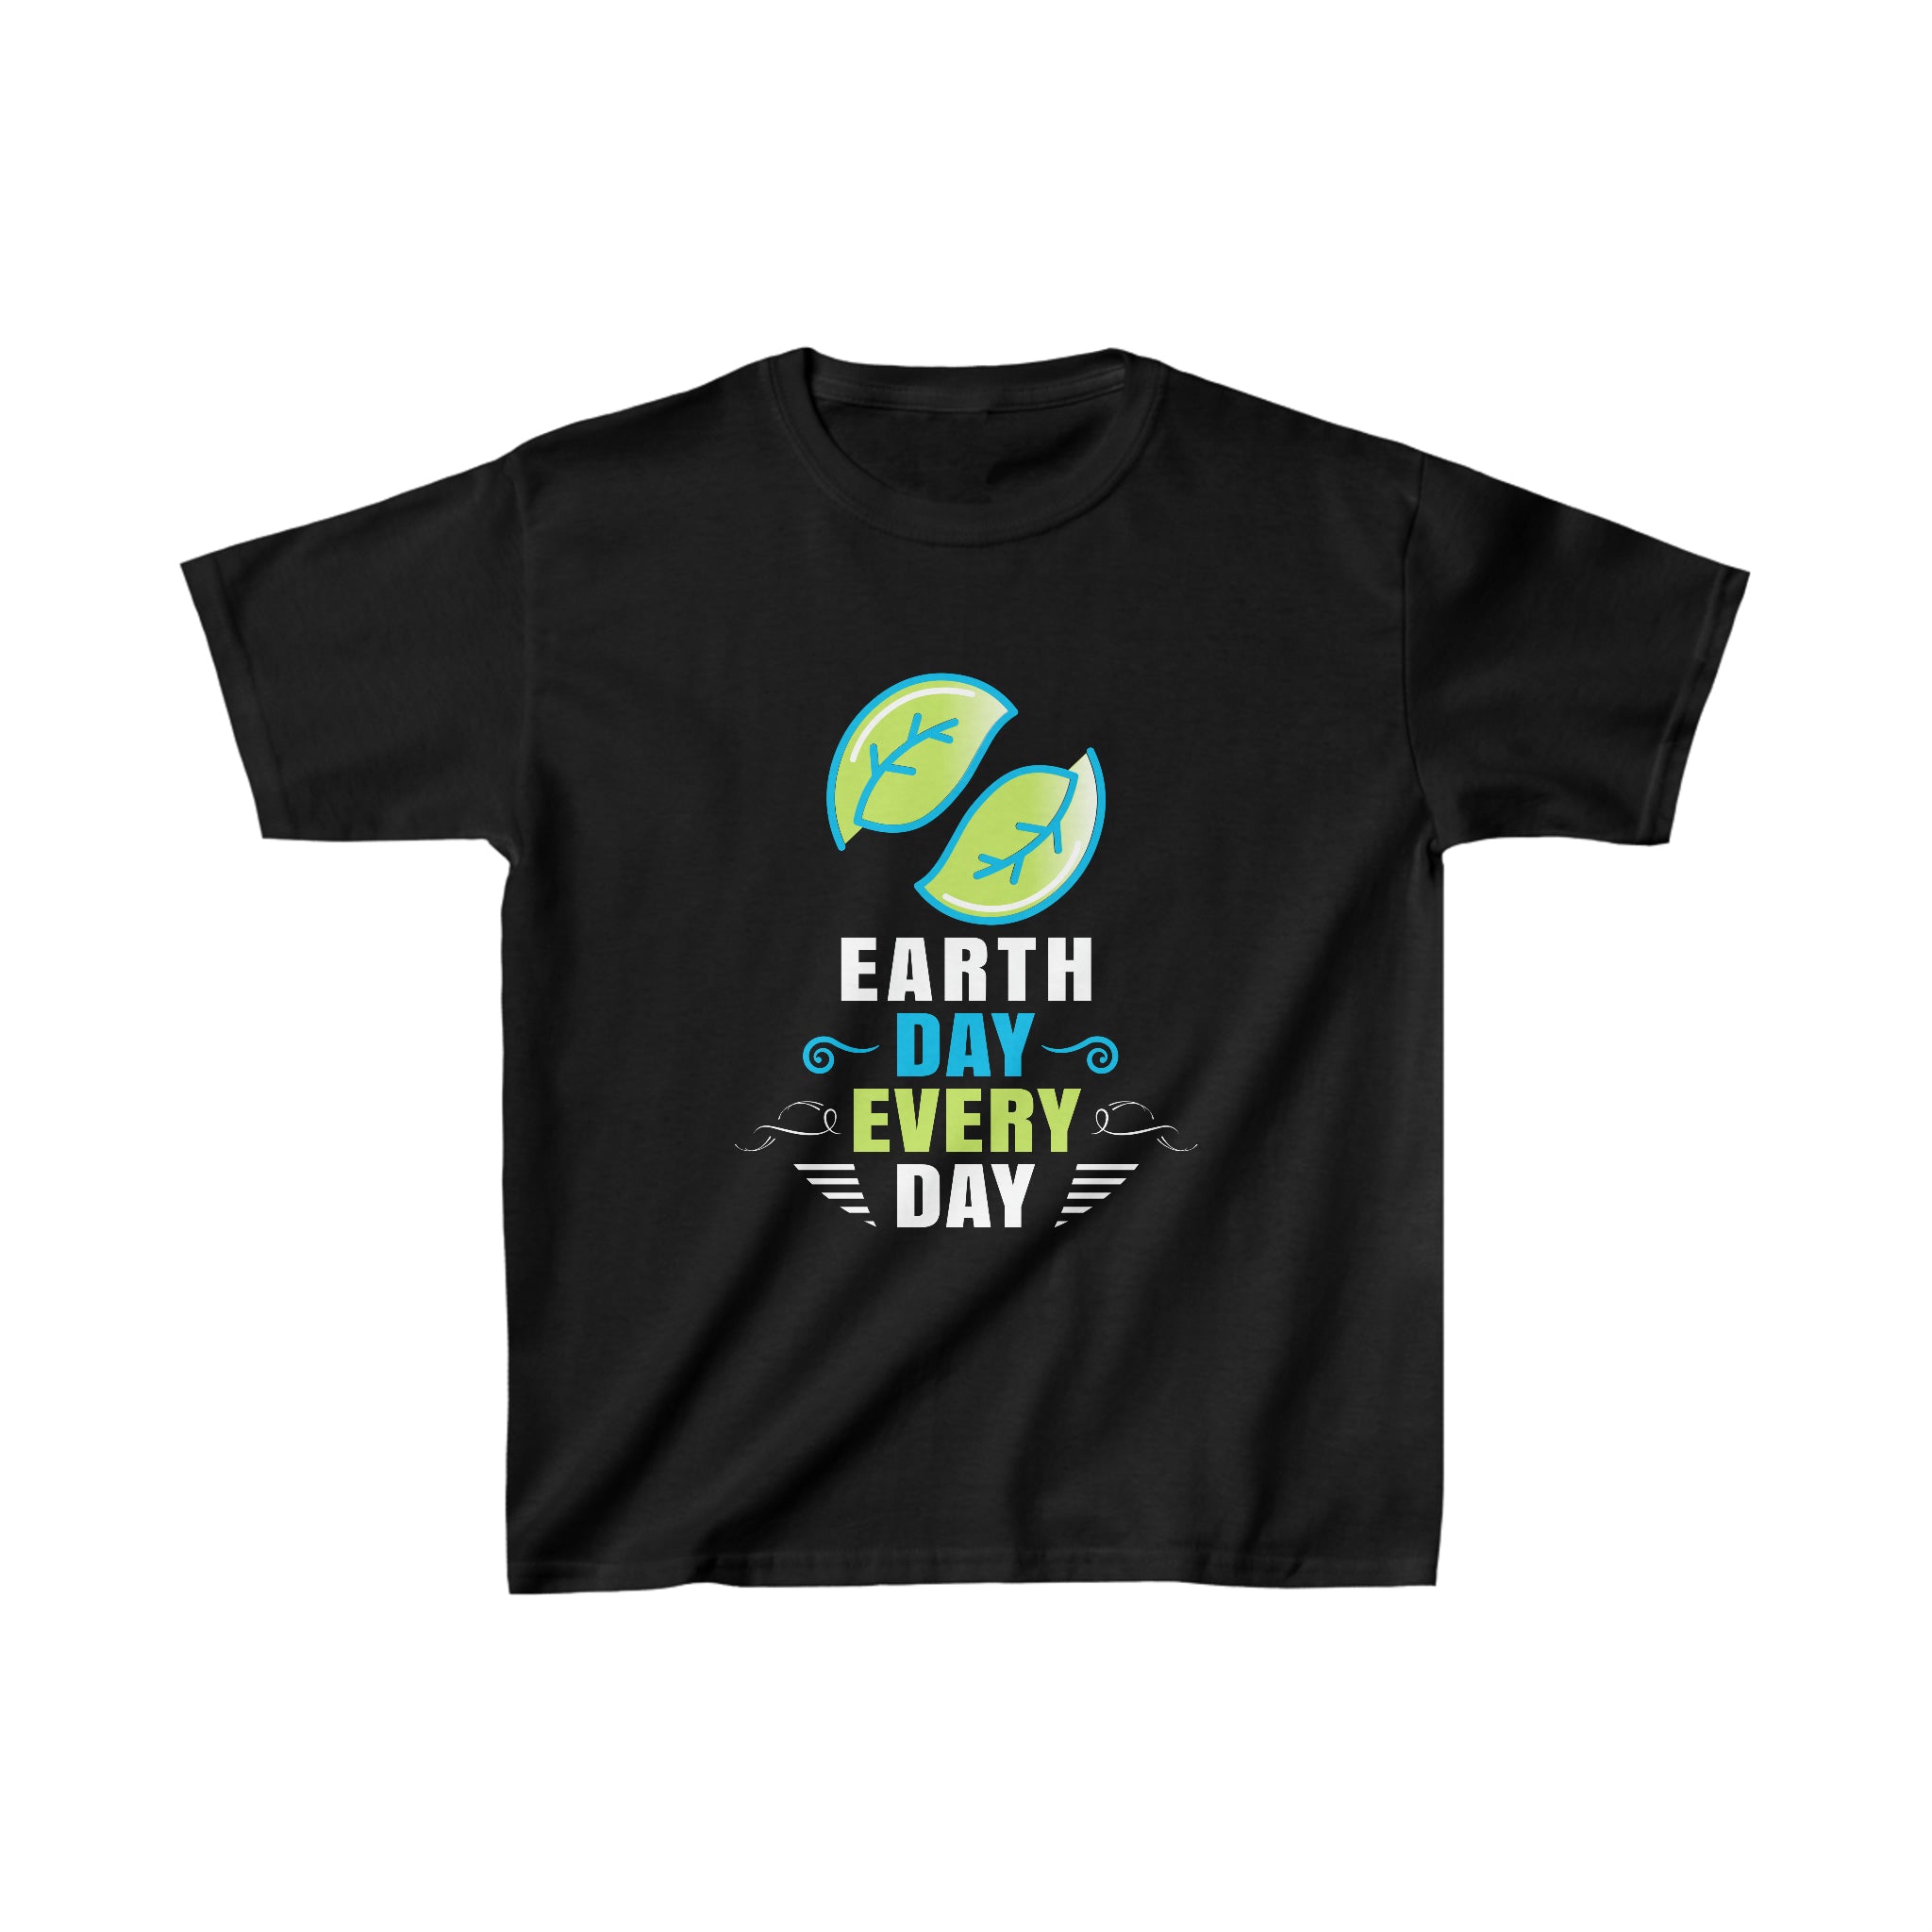 Environmental Crisis Activism Earth Day Every Day Girls Tops